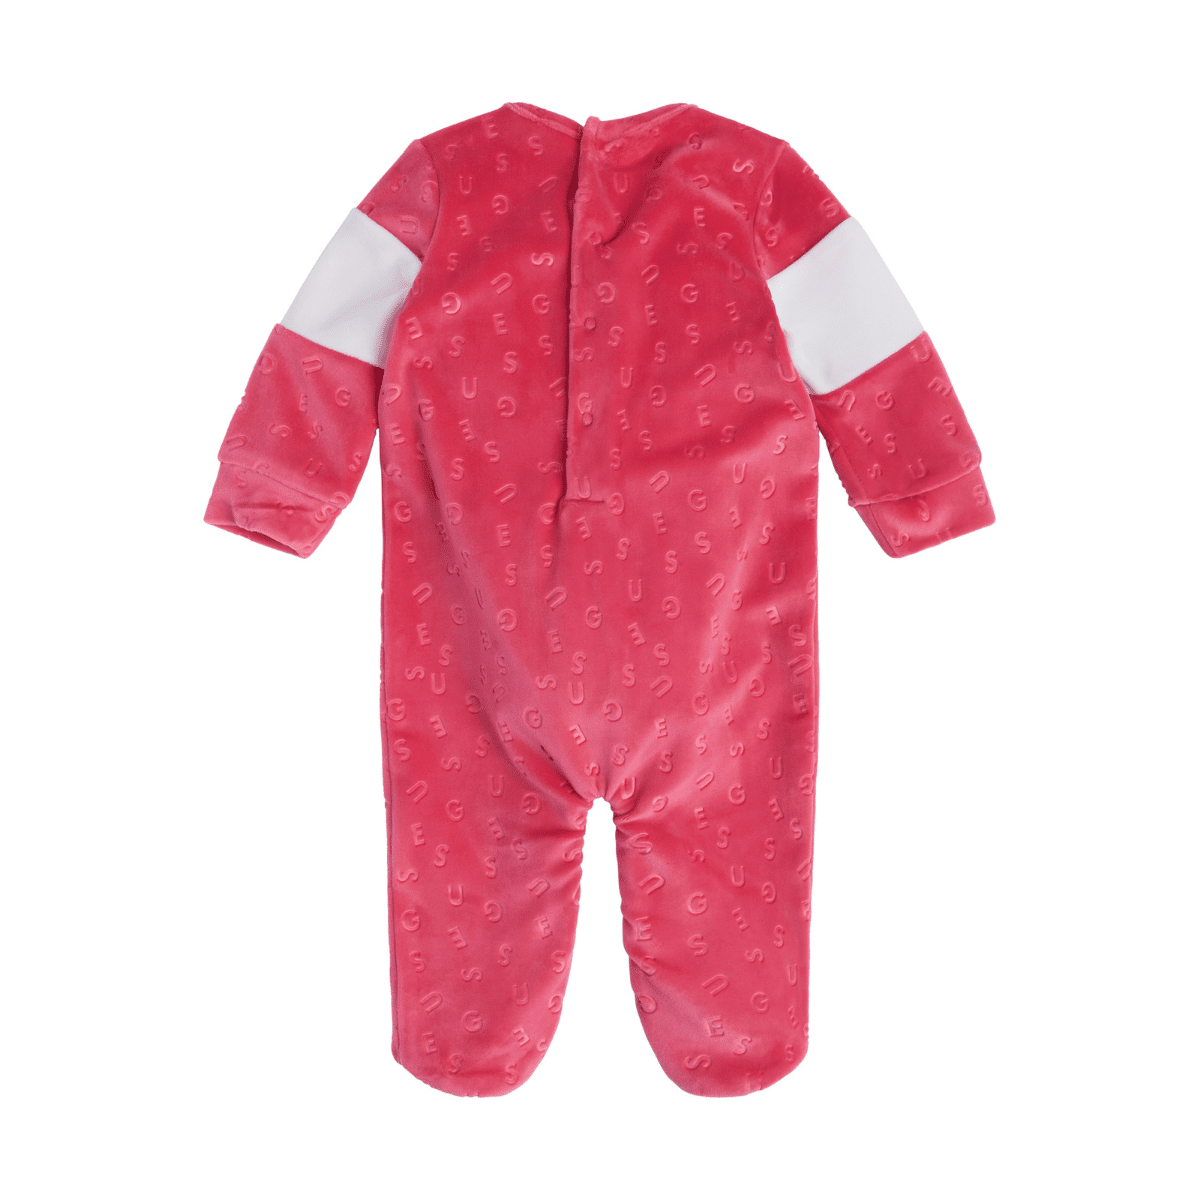 Guess baby red chenille babygro back view